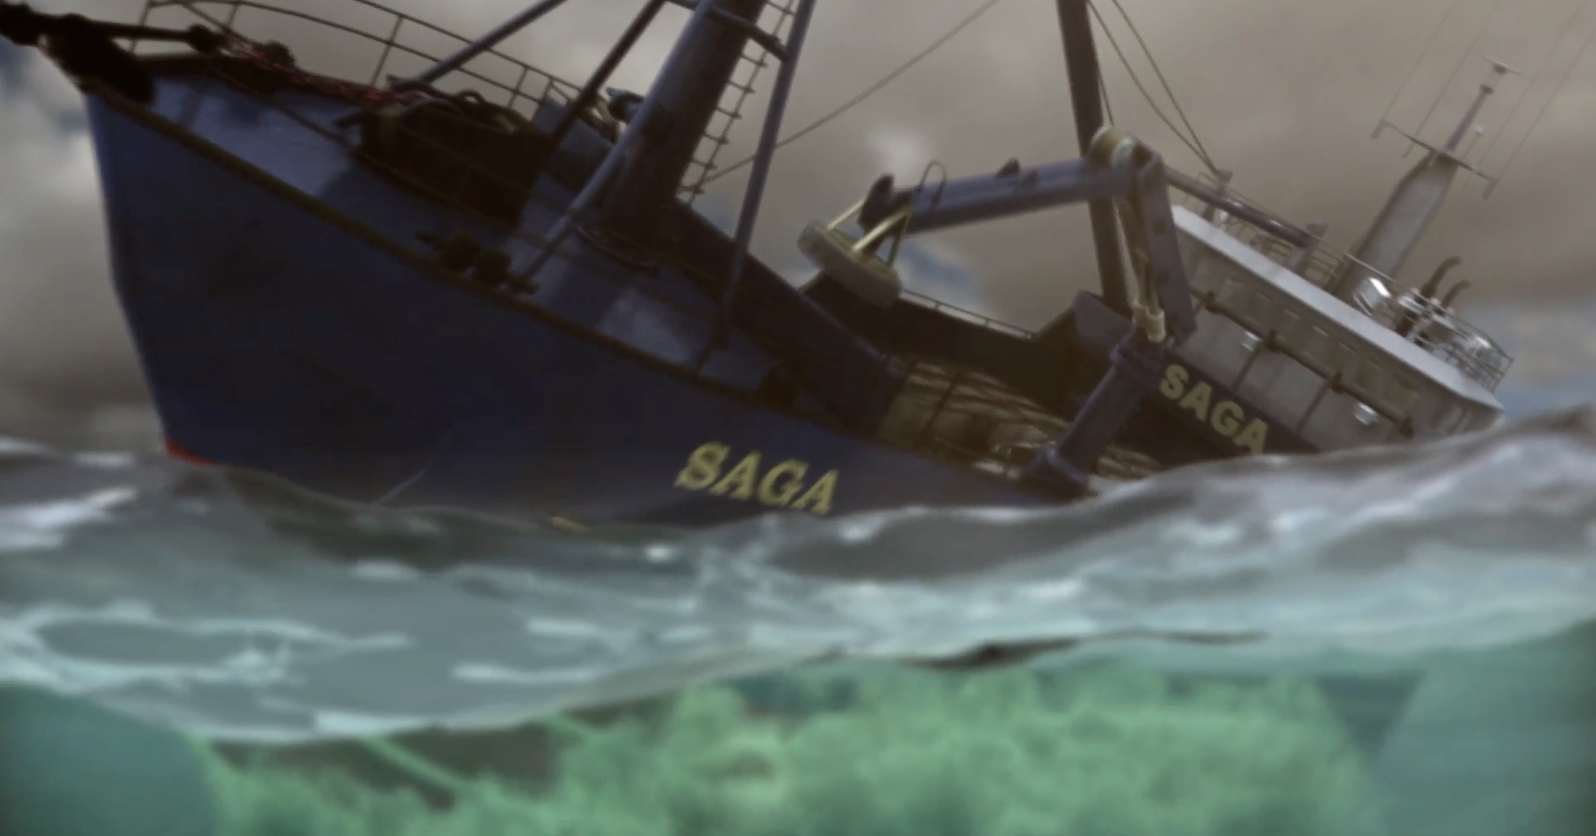 Did the Saga from ‘Deadliest Catch’ Sink? Here's What We Know